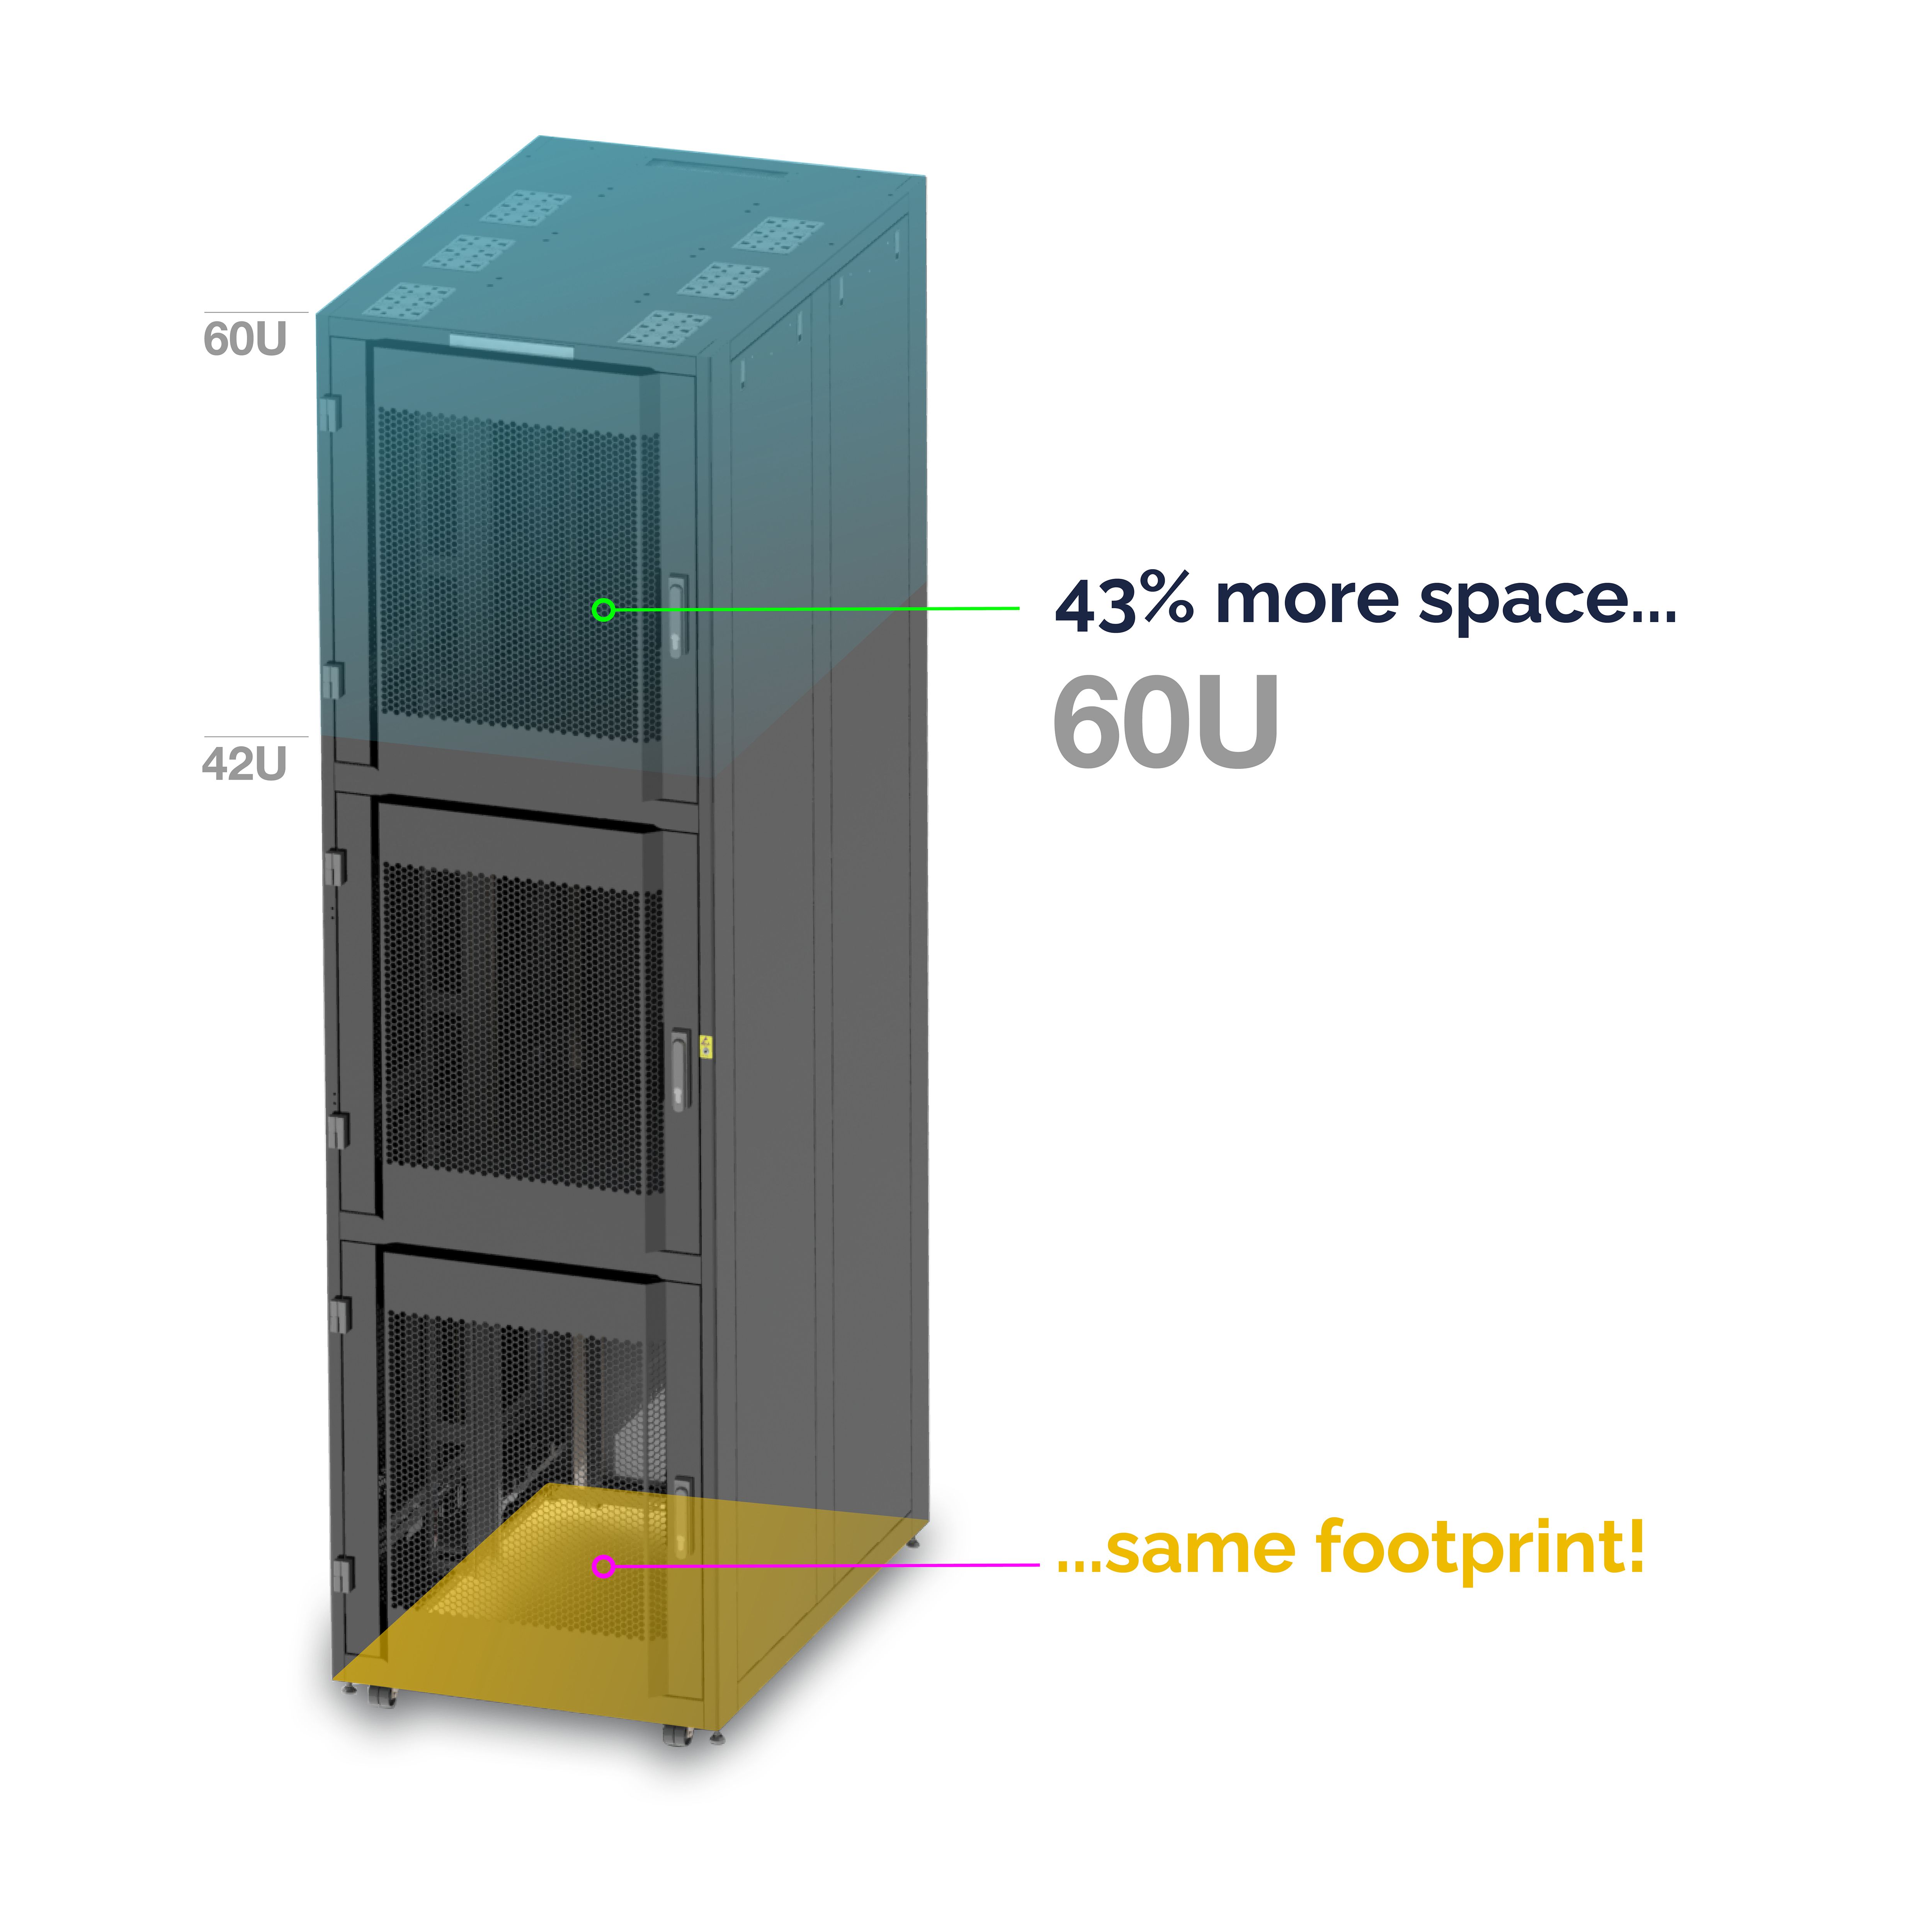 Rainford launches high density colocation and hyperscale 60U rack at  Data Centre World